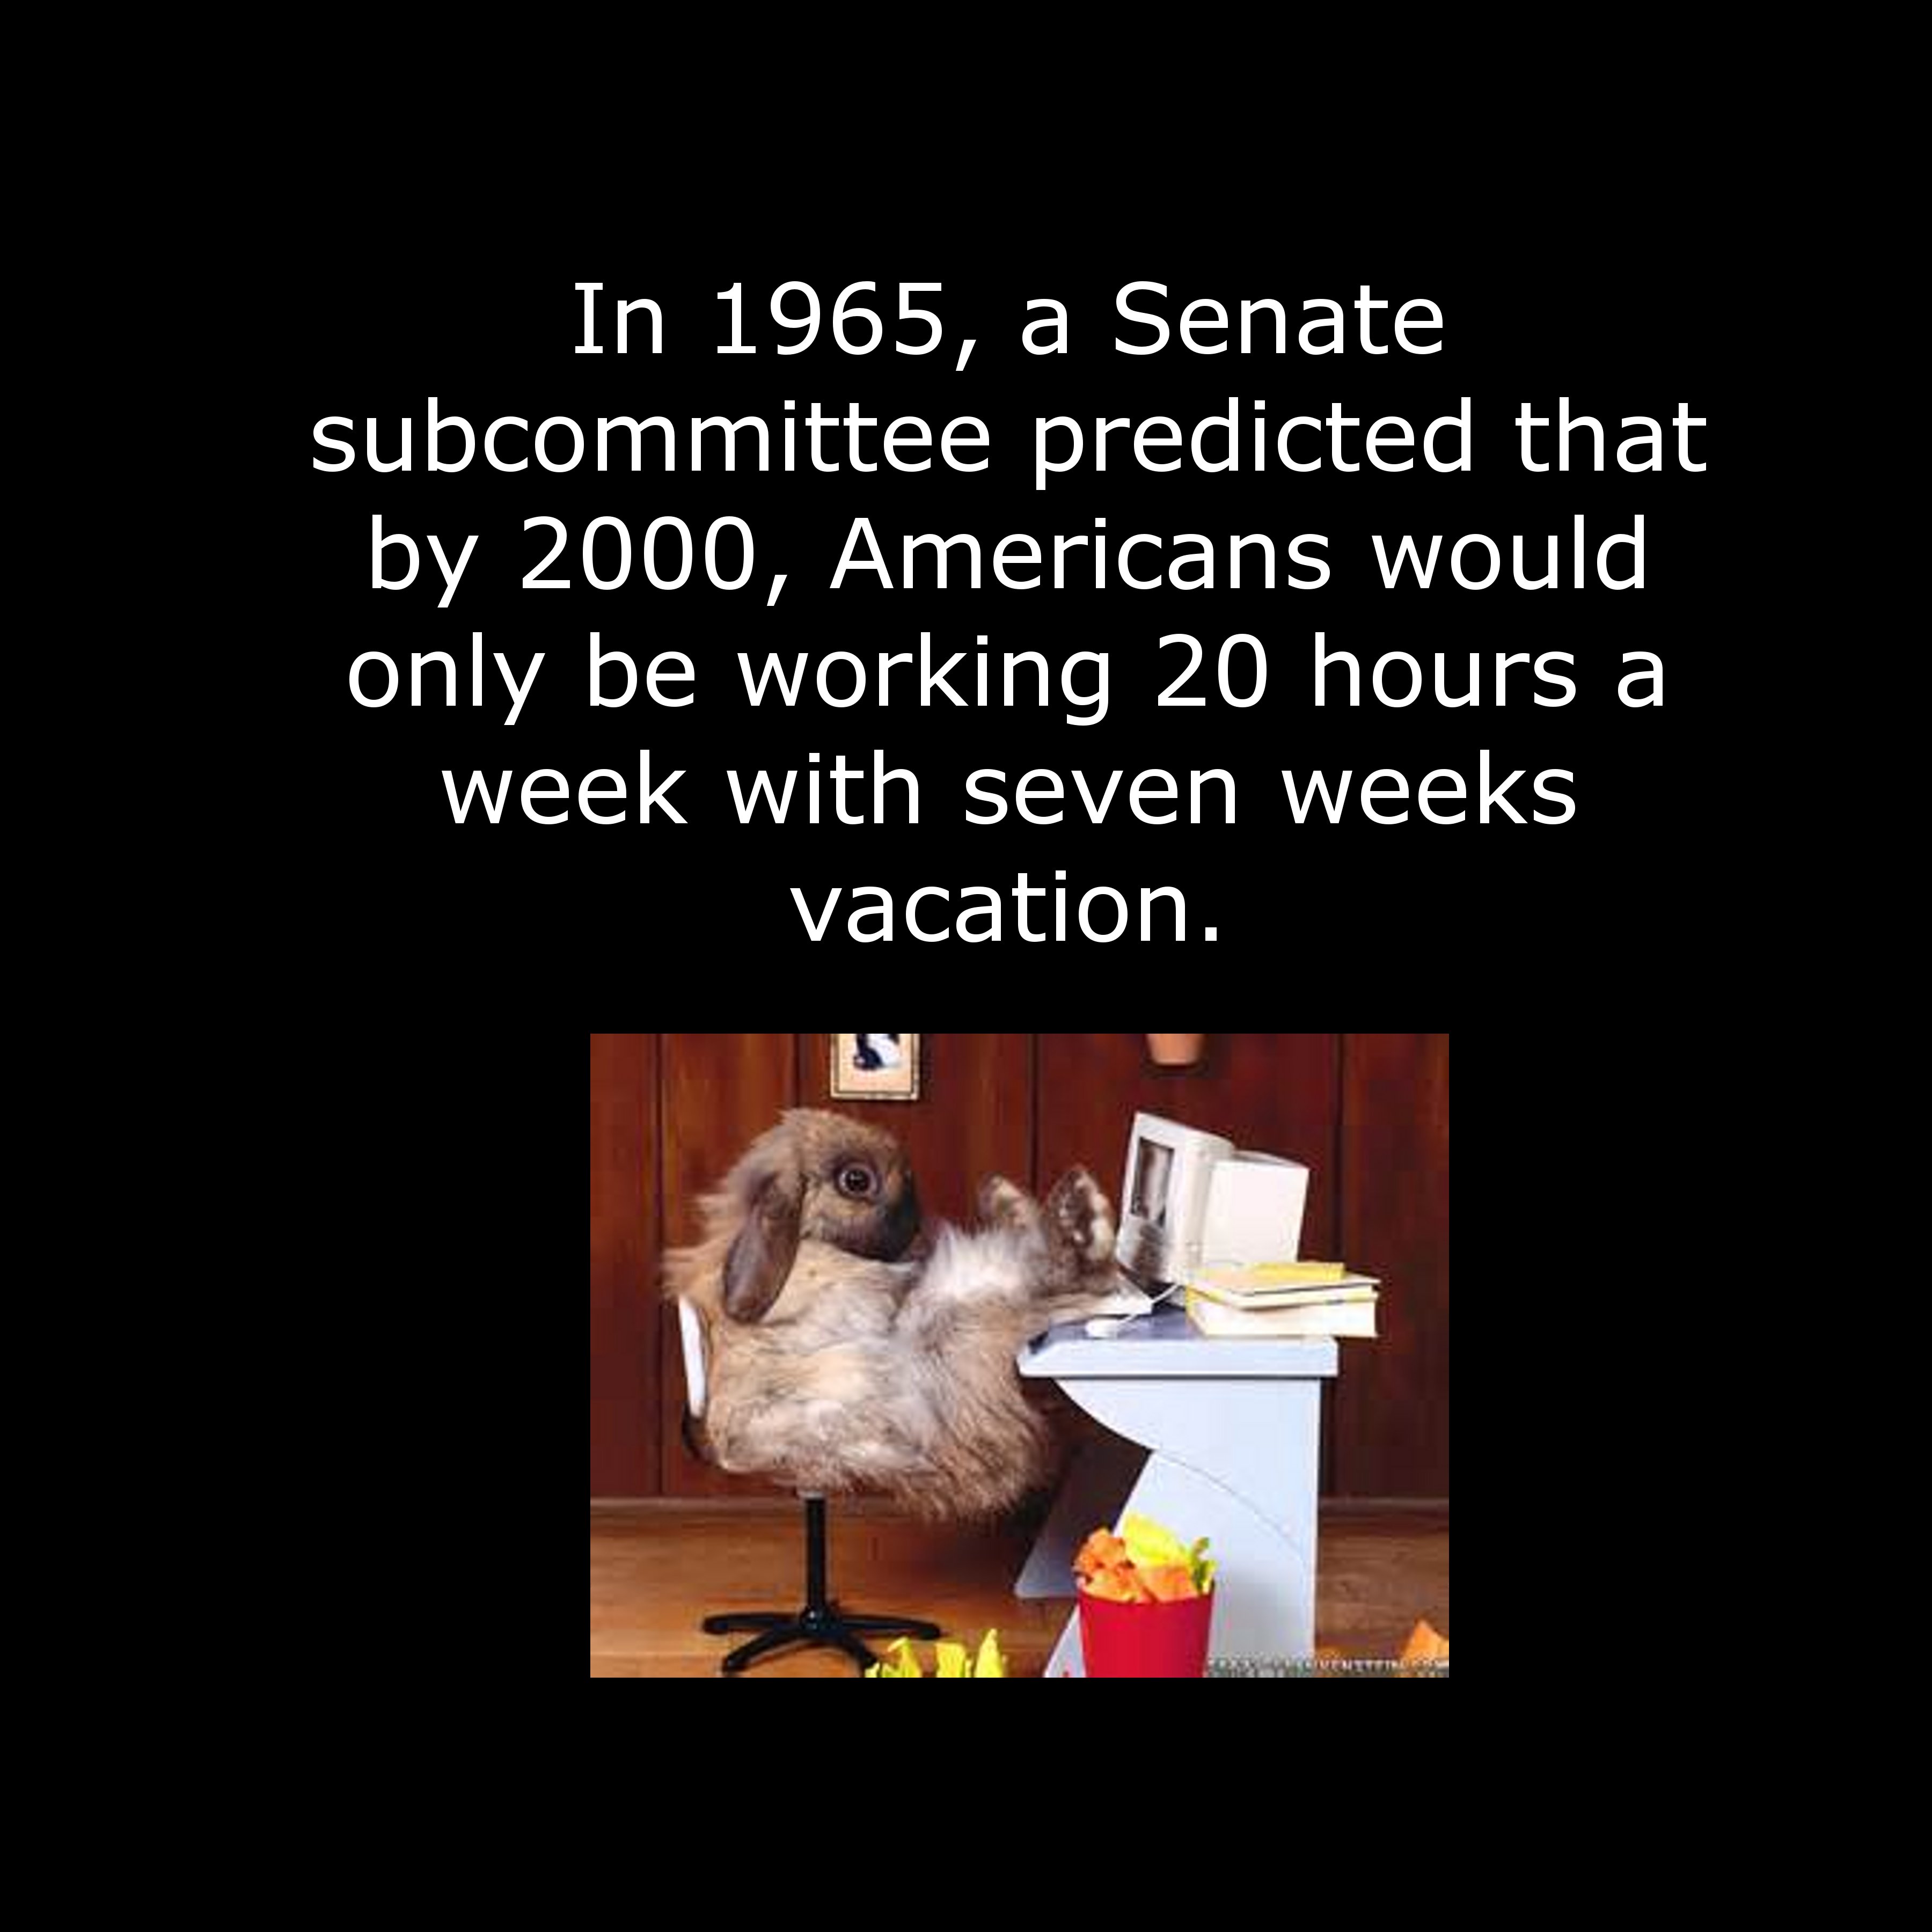 funny animal - In 1965, a Senate subcommittee predicted that by 2000, Americans would only be working 20 hours a week with seven weeks vacation.